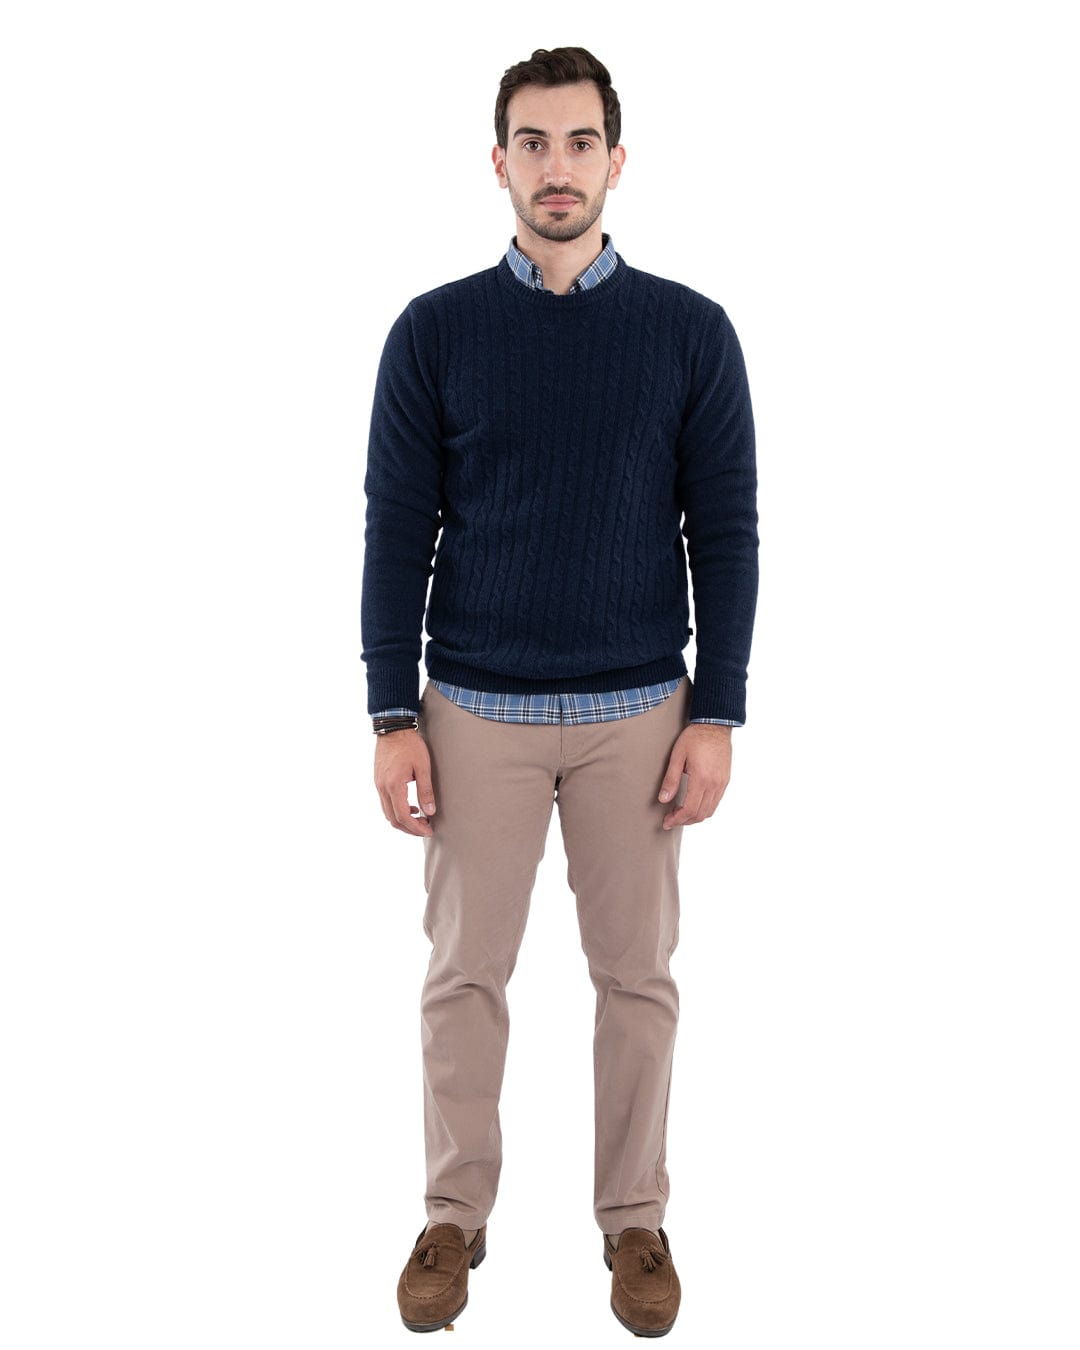 Gagliardi Jumpers Gagliardi Reclaimed Lambswool Blue Cable Front Crew Neck Jumper